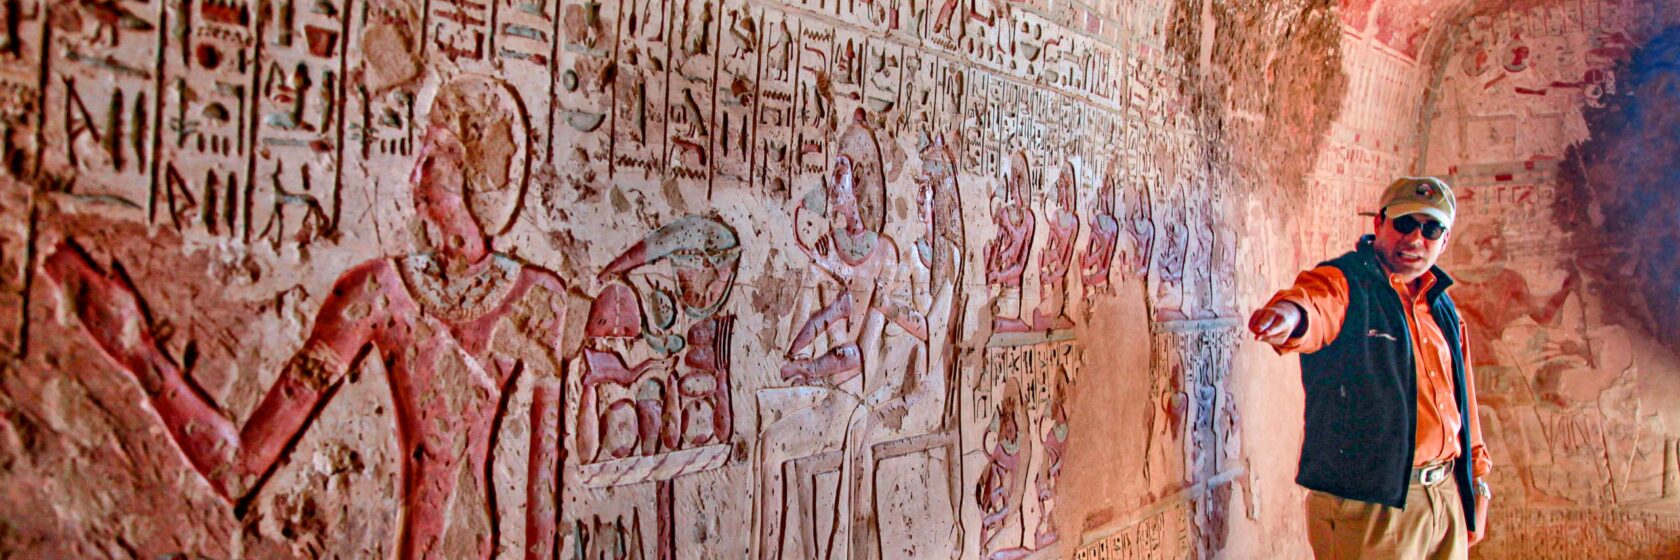 A trip leader showing a mural in Egypt.